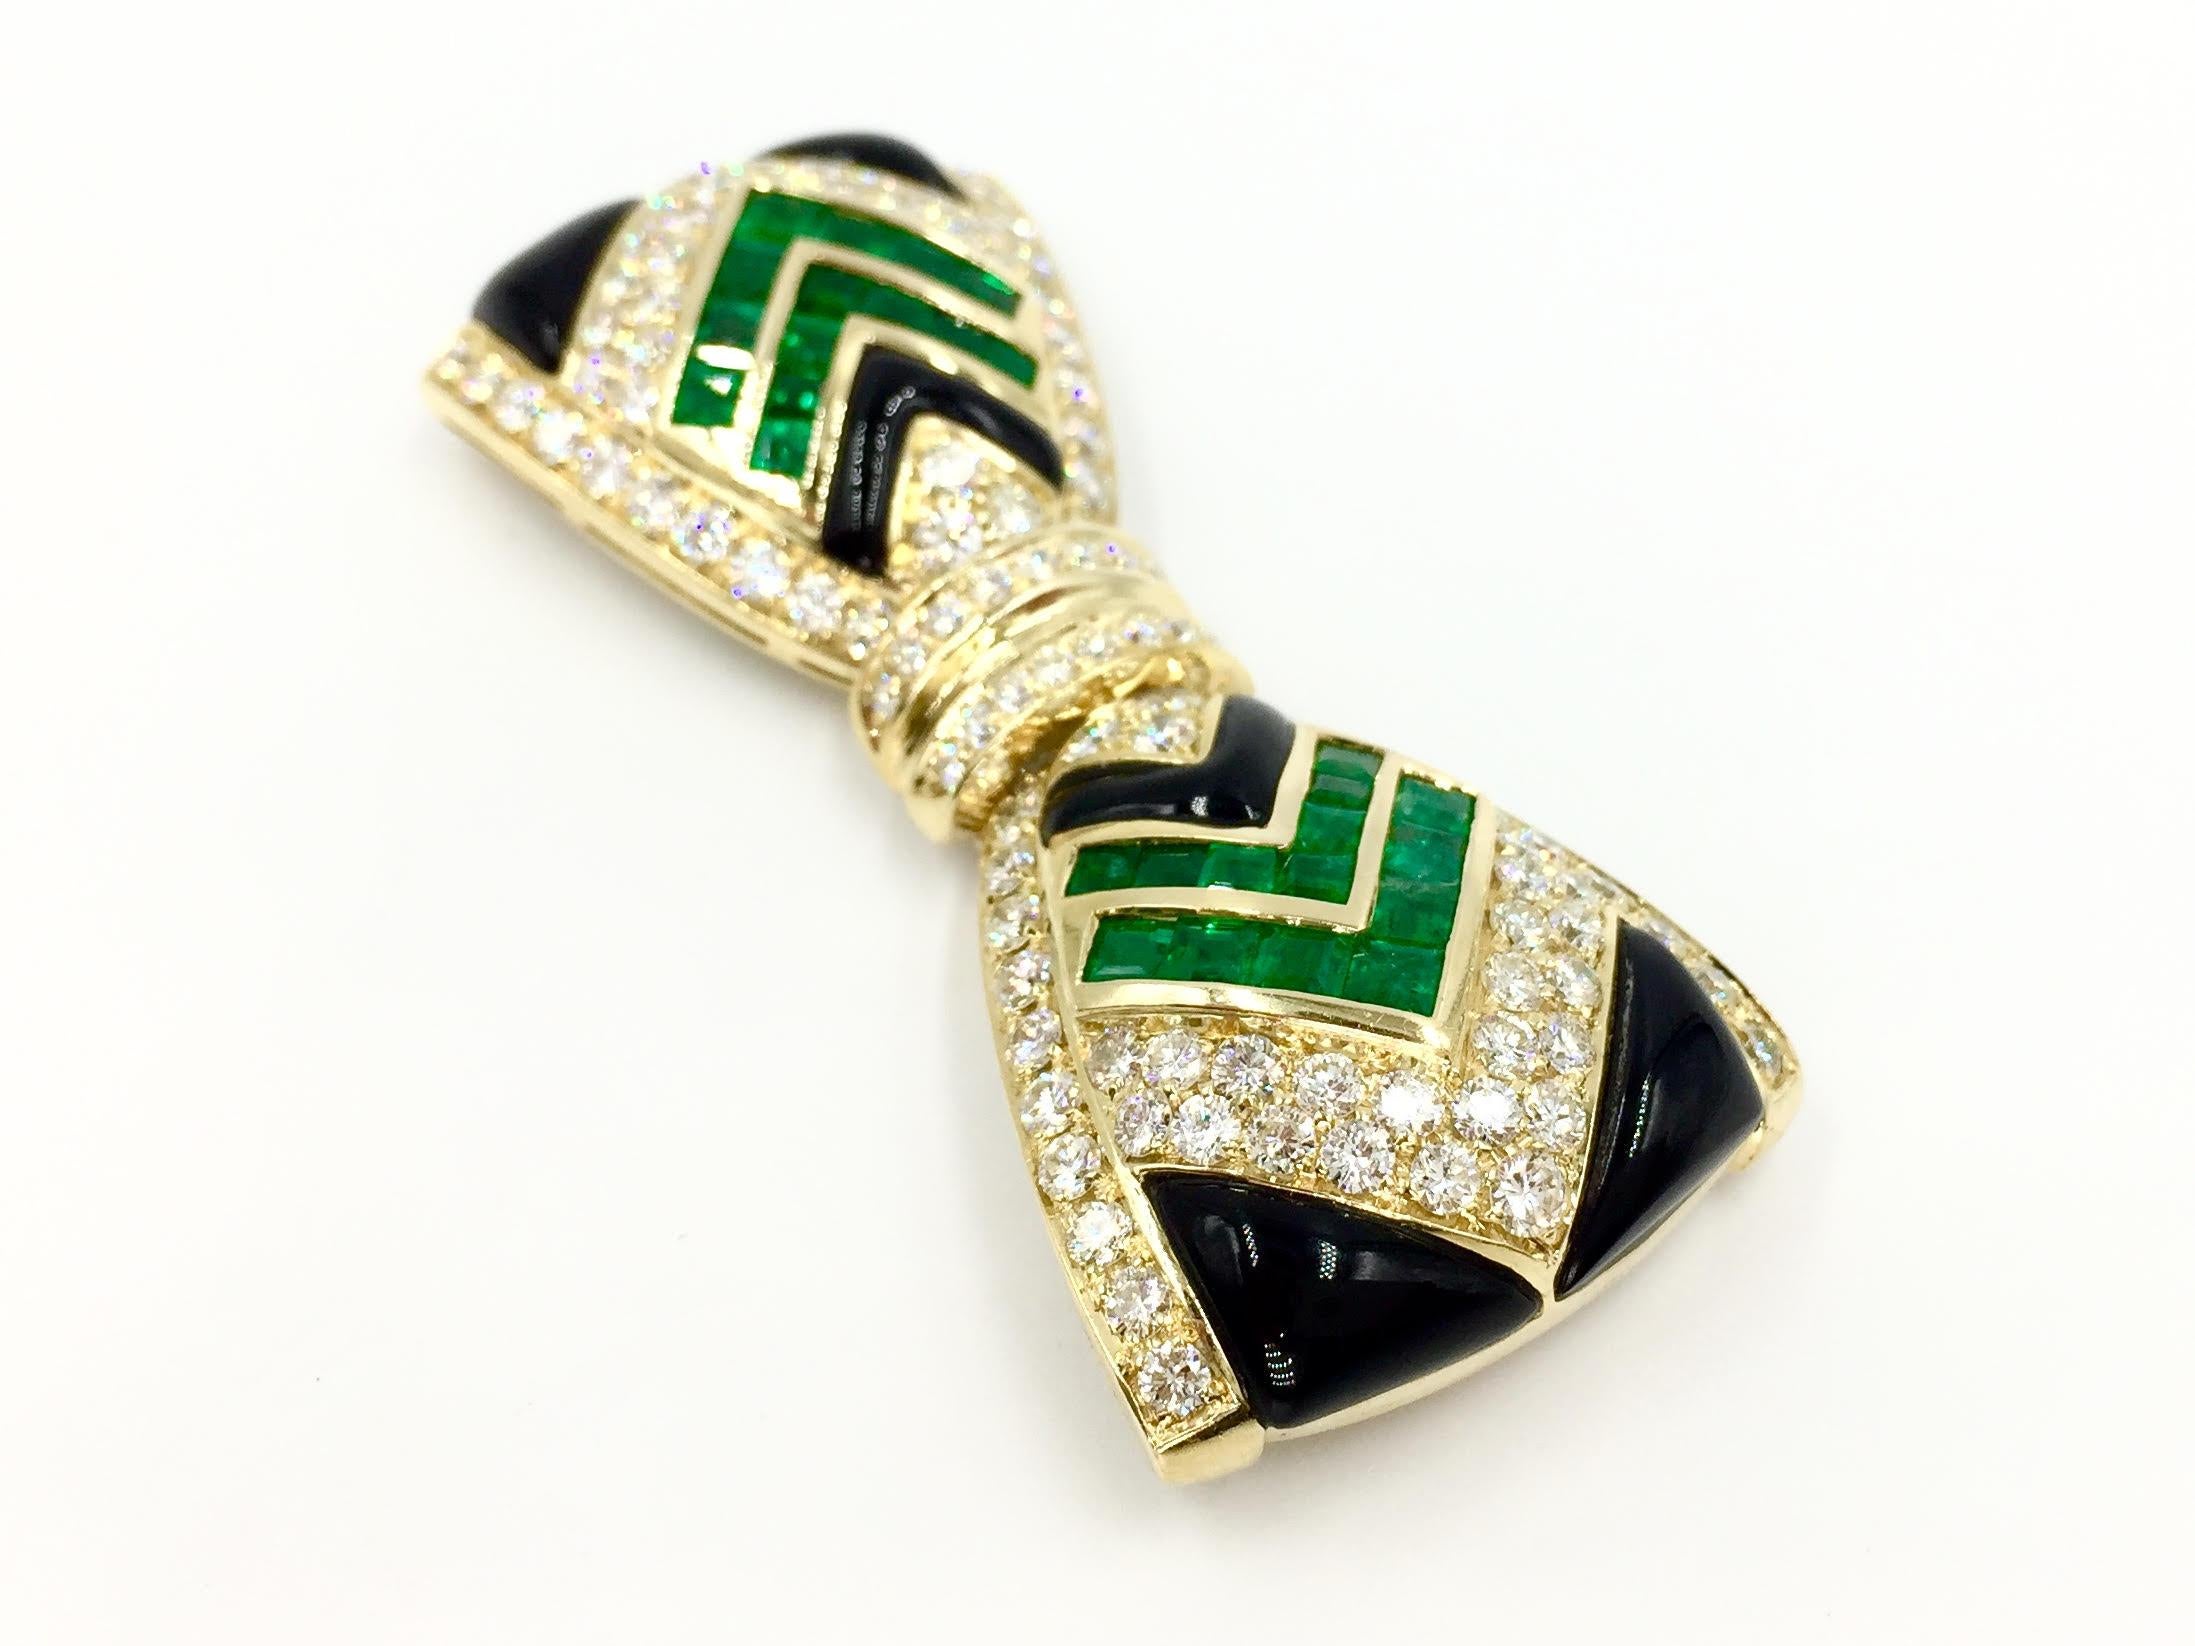 A gorgeous Art Deco inspired vintage 18 karat bow tie design brooch created by Italian fine jewelry designer, Giovane. Made with exceptional quality stones and incredible craftsmanship. Brooch features 4.45 carats of vivid channel set genuine